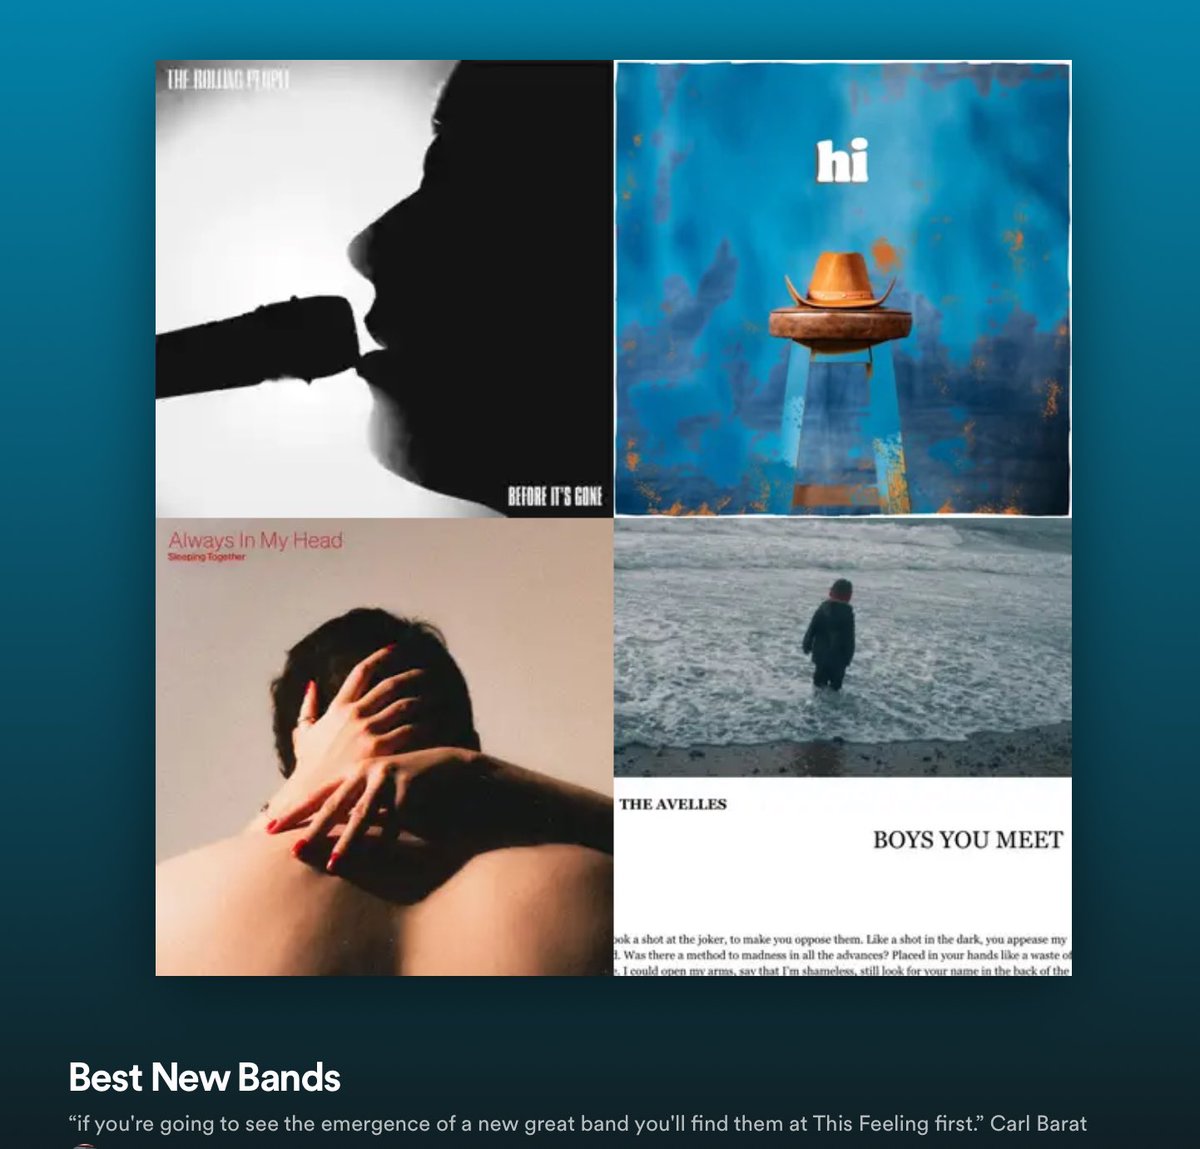 Best New Bands playlist adds 15/2024 🎸🔥 @TRPofficial @88milesband @SleepinTogether @theavelles @STONELIVERPOOL @Corellamusic @abbieizzard @_commongoldfish @MothersUgly @AutomotionBand @seagoth_mp3 @thevoydofficial @soulloveband_ @TheOuters @GOSofficial_…